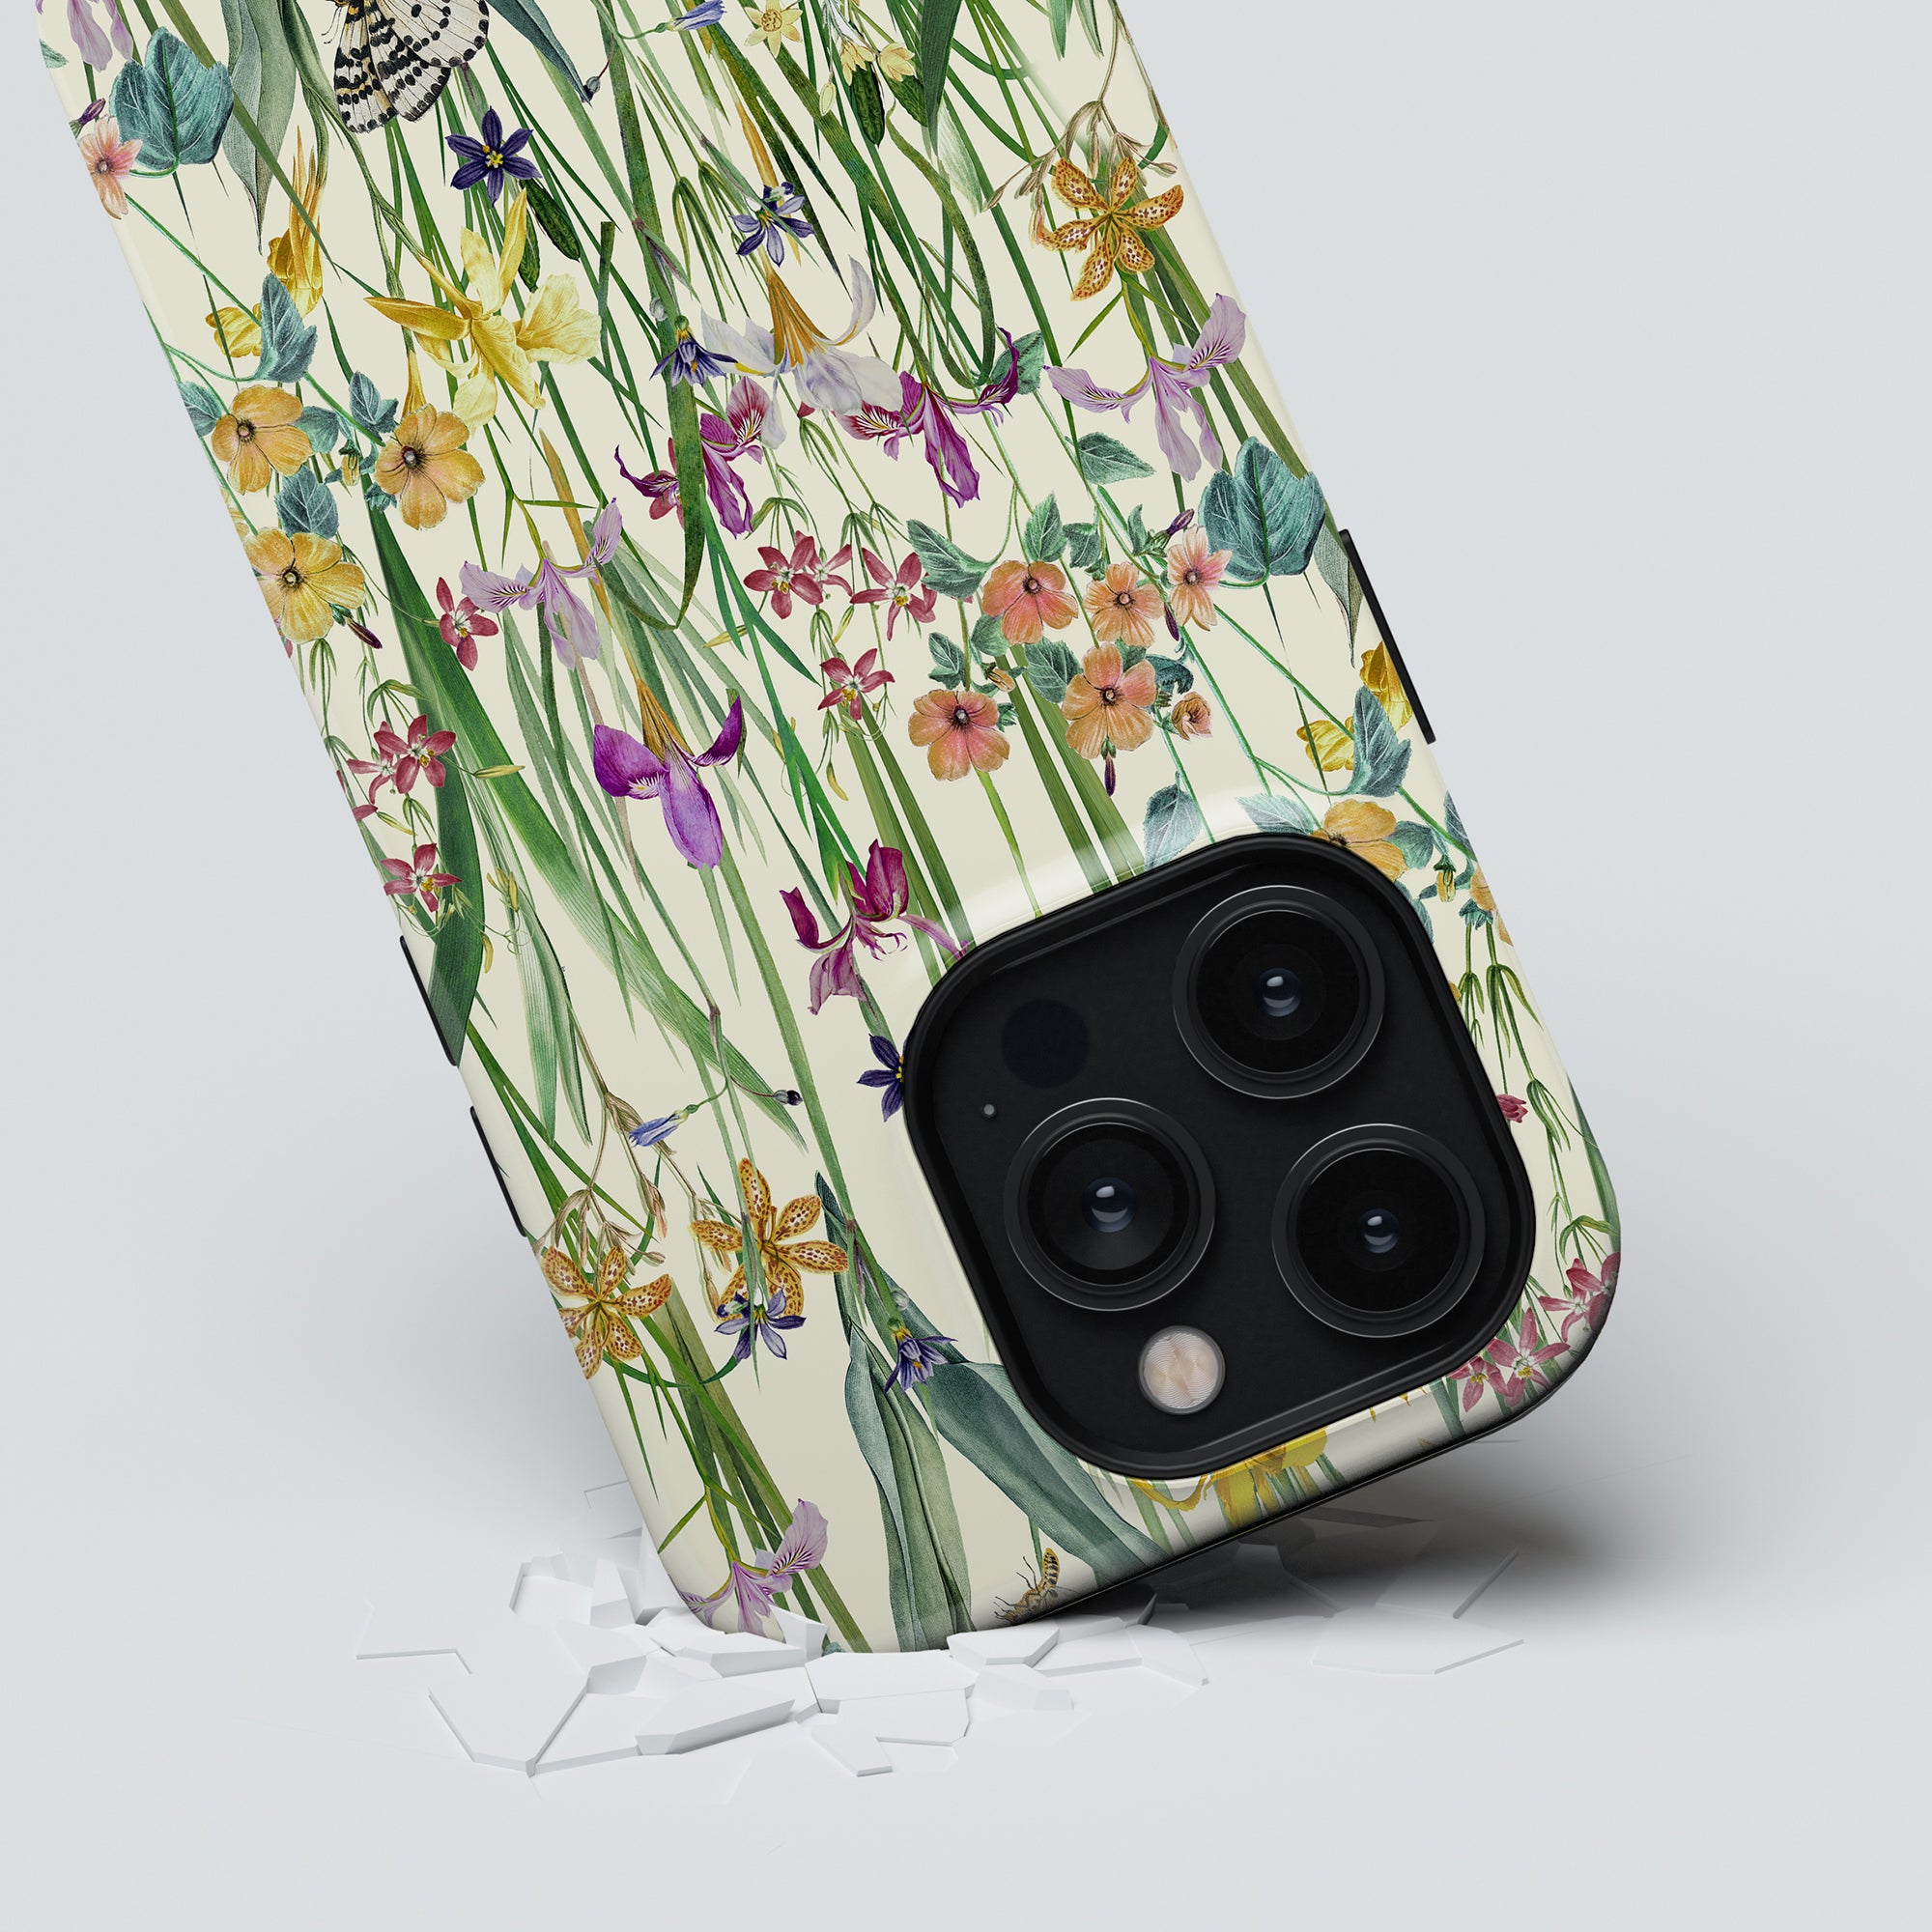 A smartphone with a Blooming Meadow - Tough Case showing a shattered screen area near the camera lenses, now wrapped in breathable material for added protection.